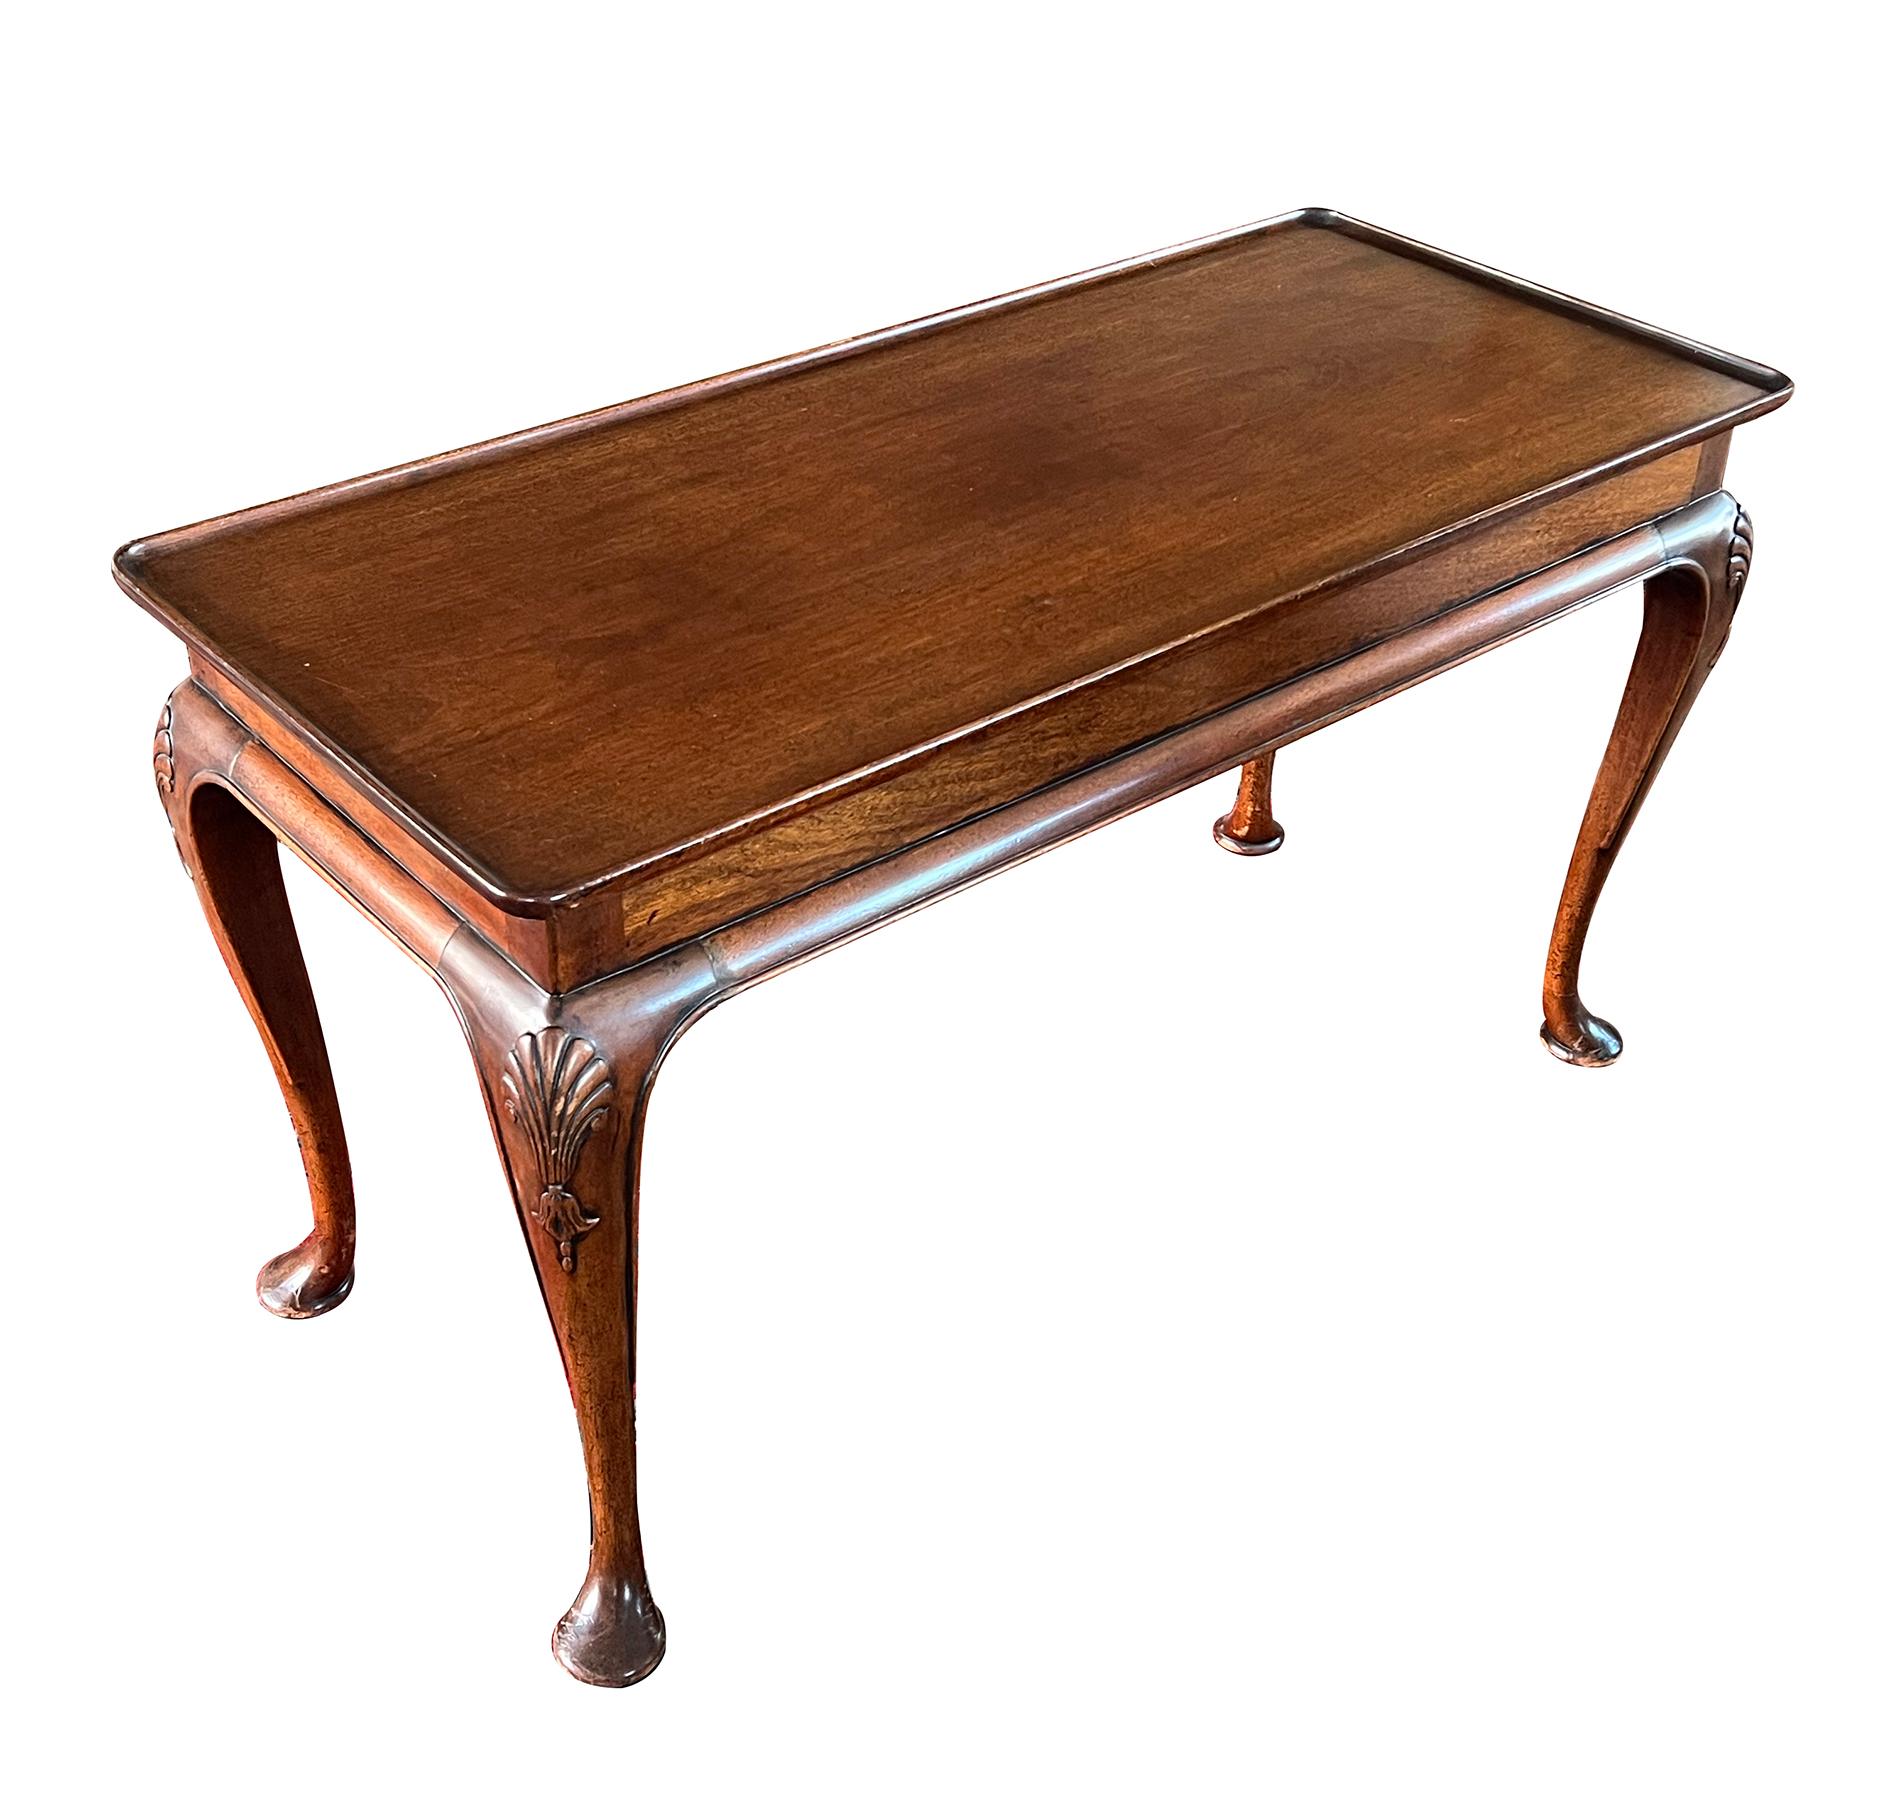 the rectangular dish top with raised molded edge above a plain frieze apron above a rolled perimeter molding; raised on elegantly-shaped cabriole supports with shell carved knees all ending in pad feet